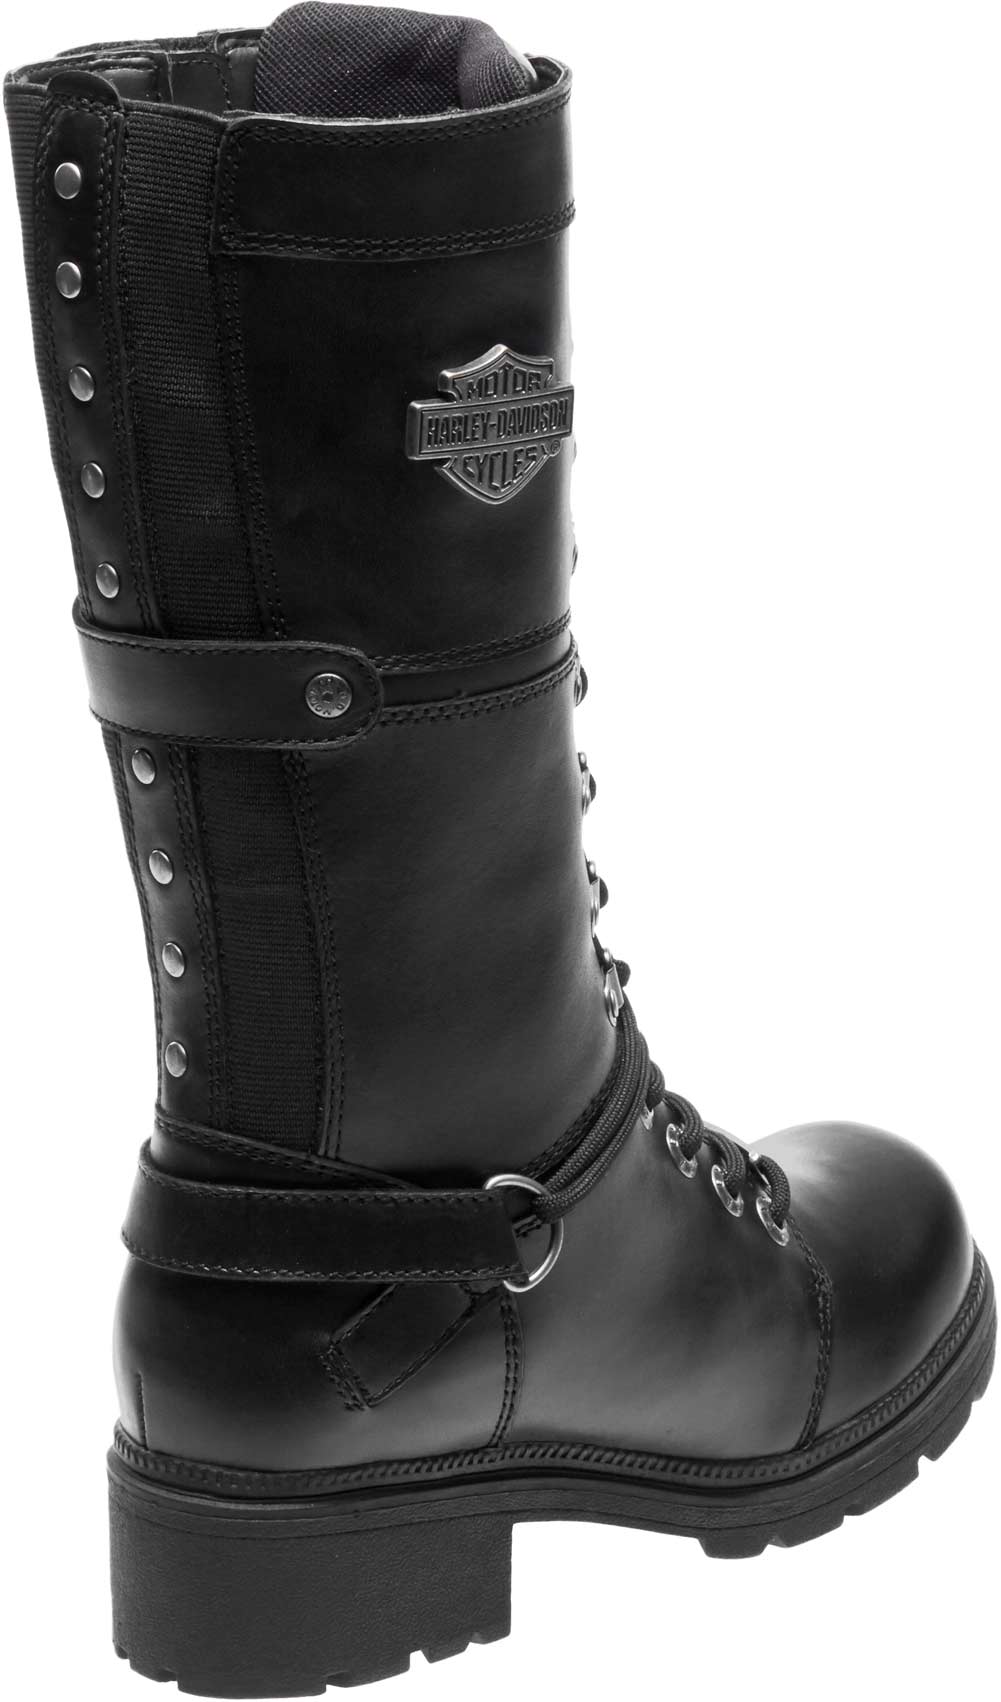  Quealent womens motorcycle boots Women Comfortable